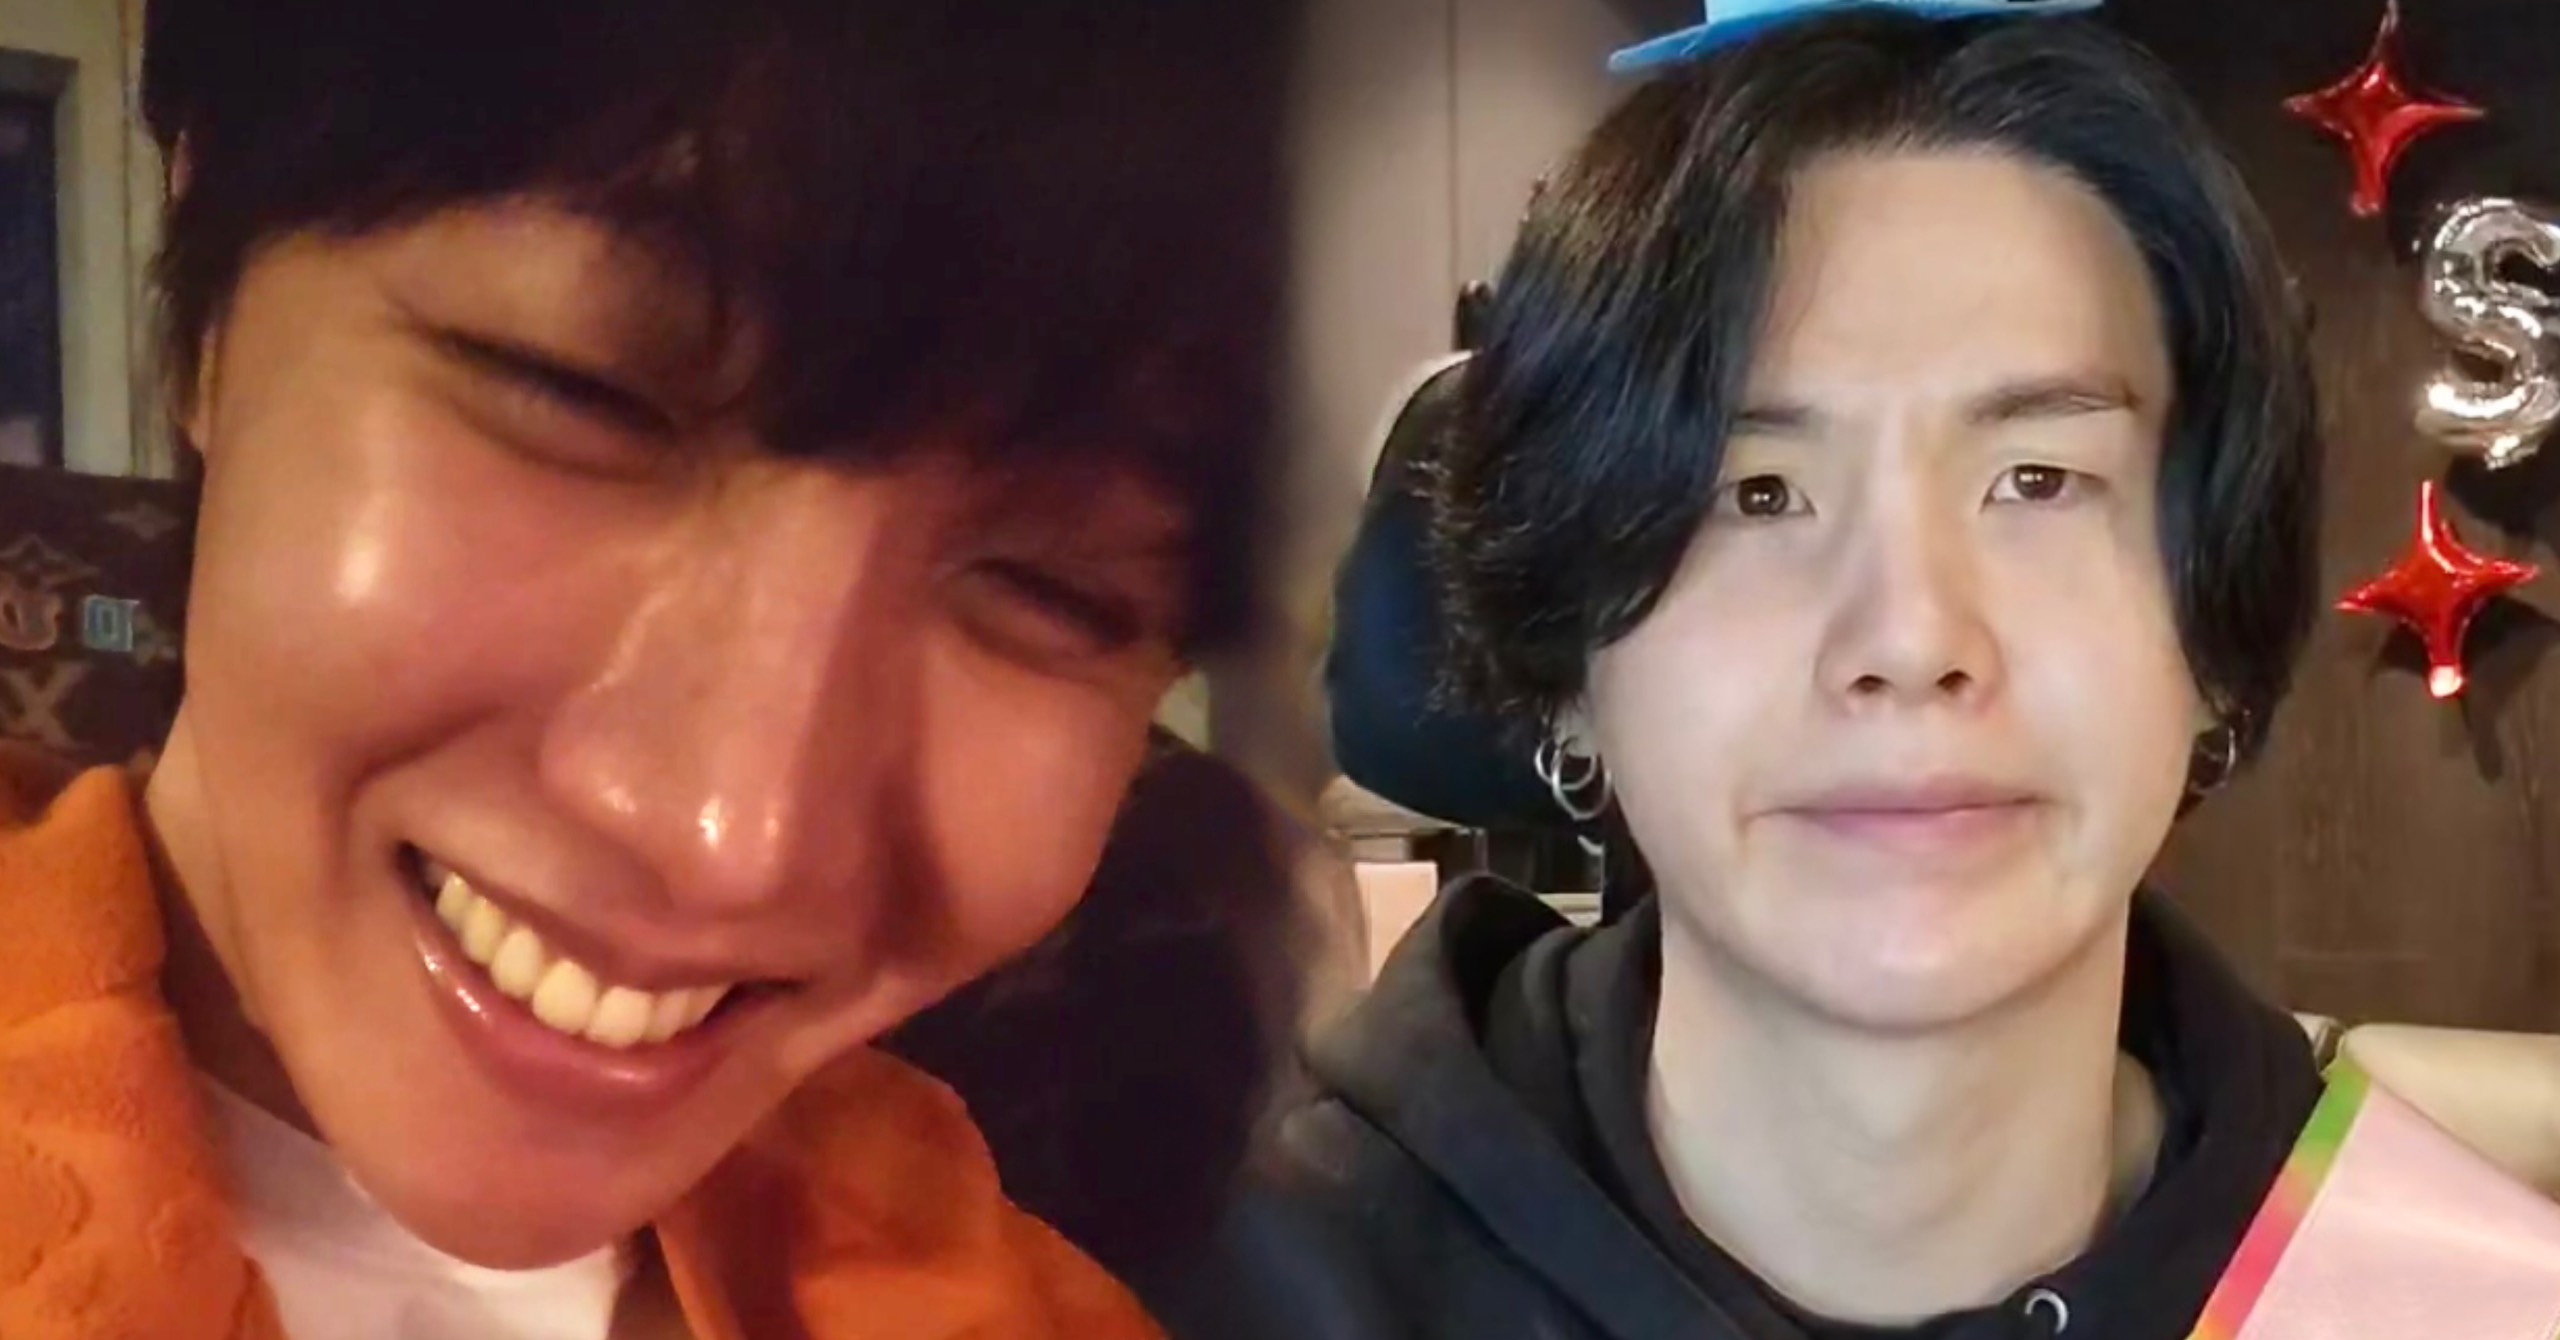 j-hope's Reaction When Seeing “SUGA’s Wife” Greet Him On His Live Broadcast